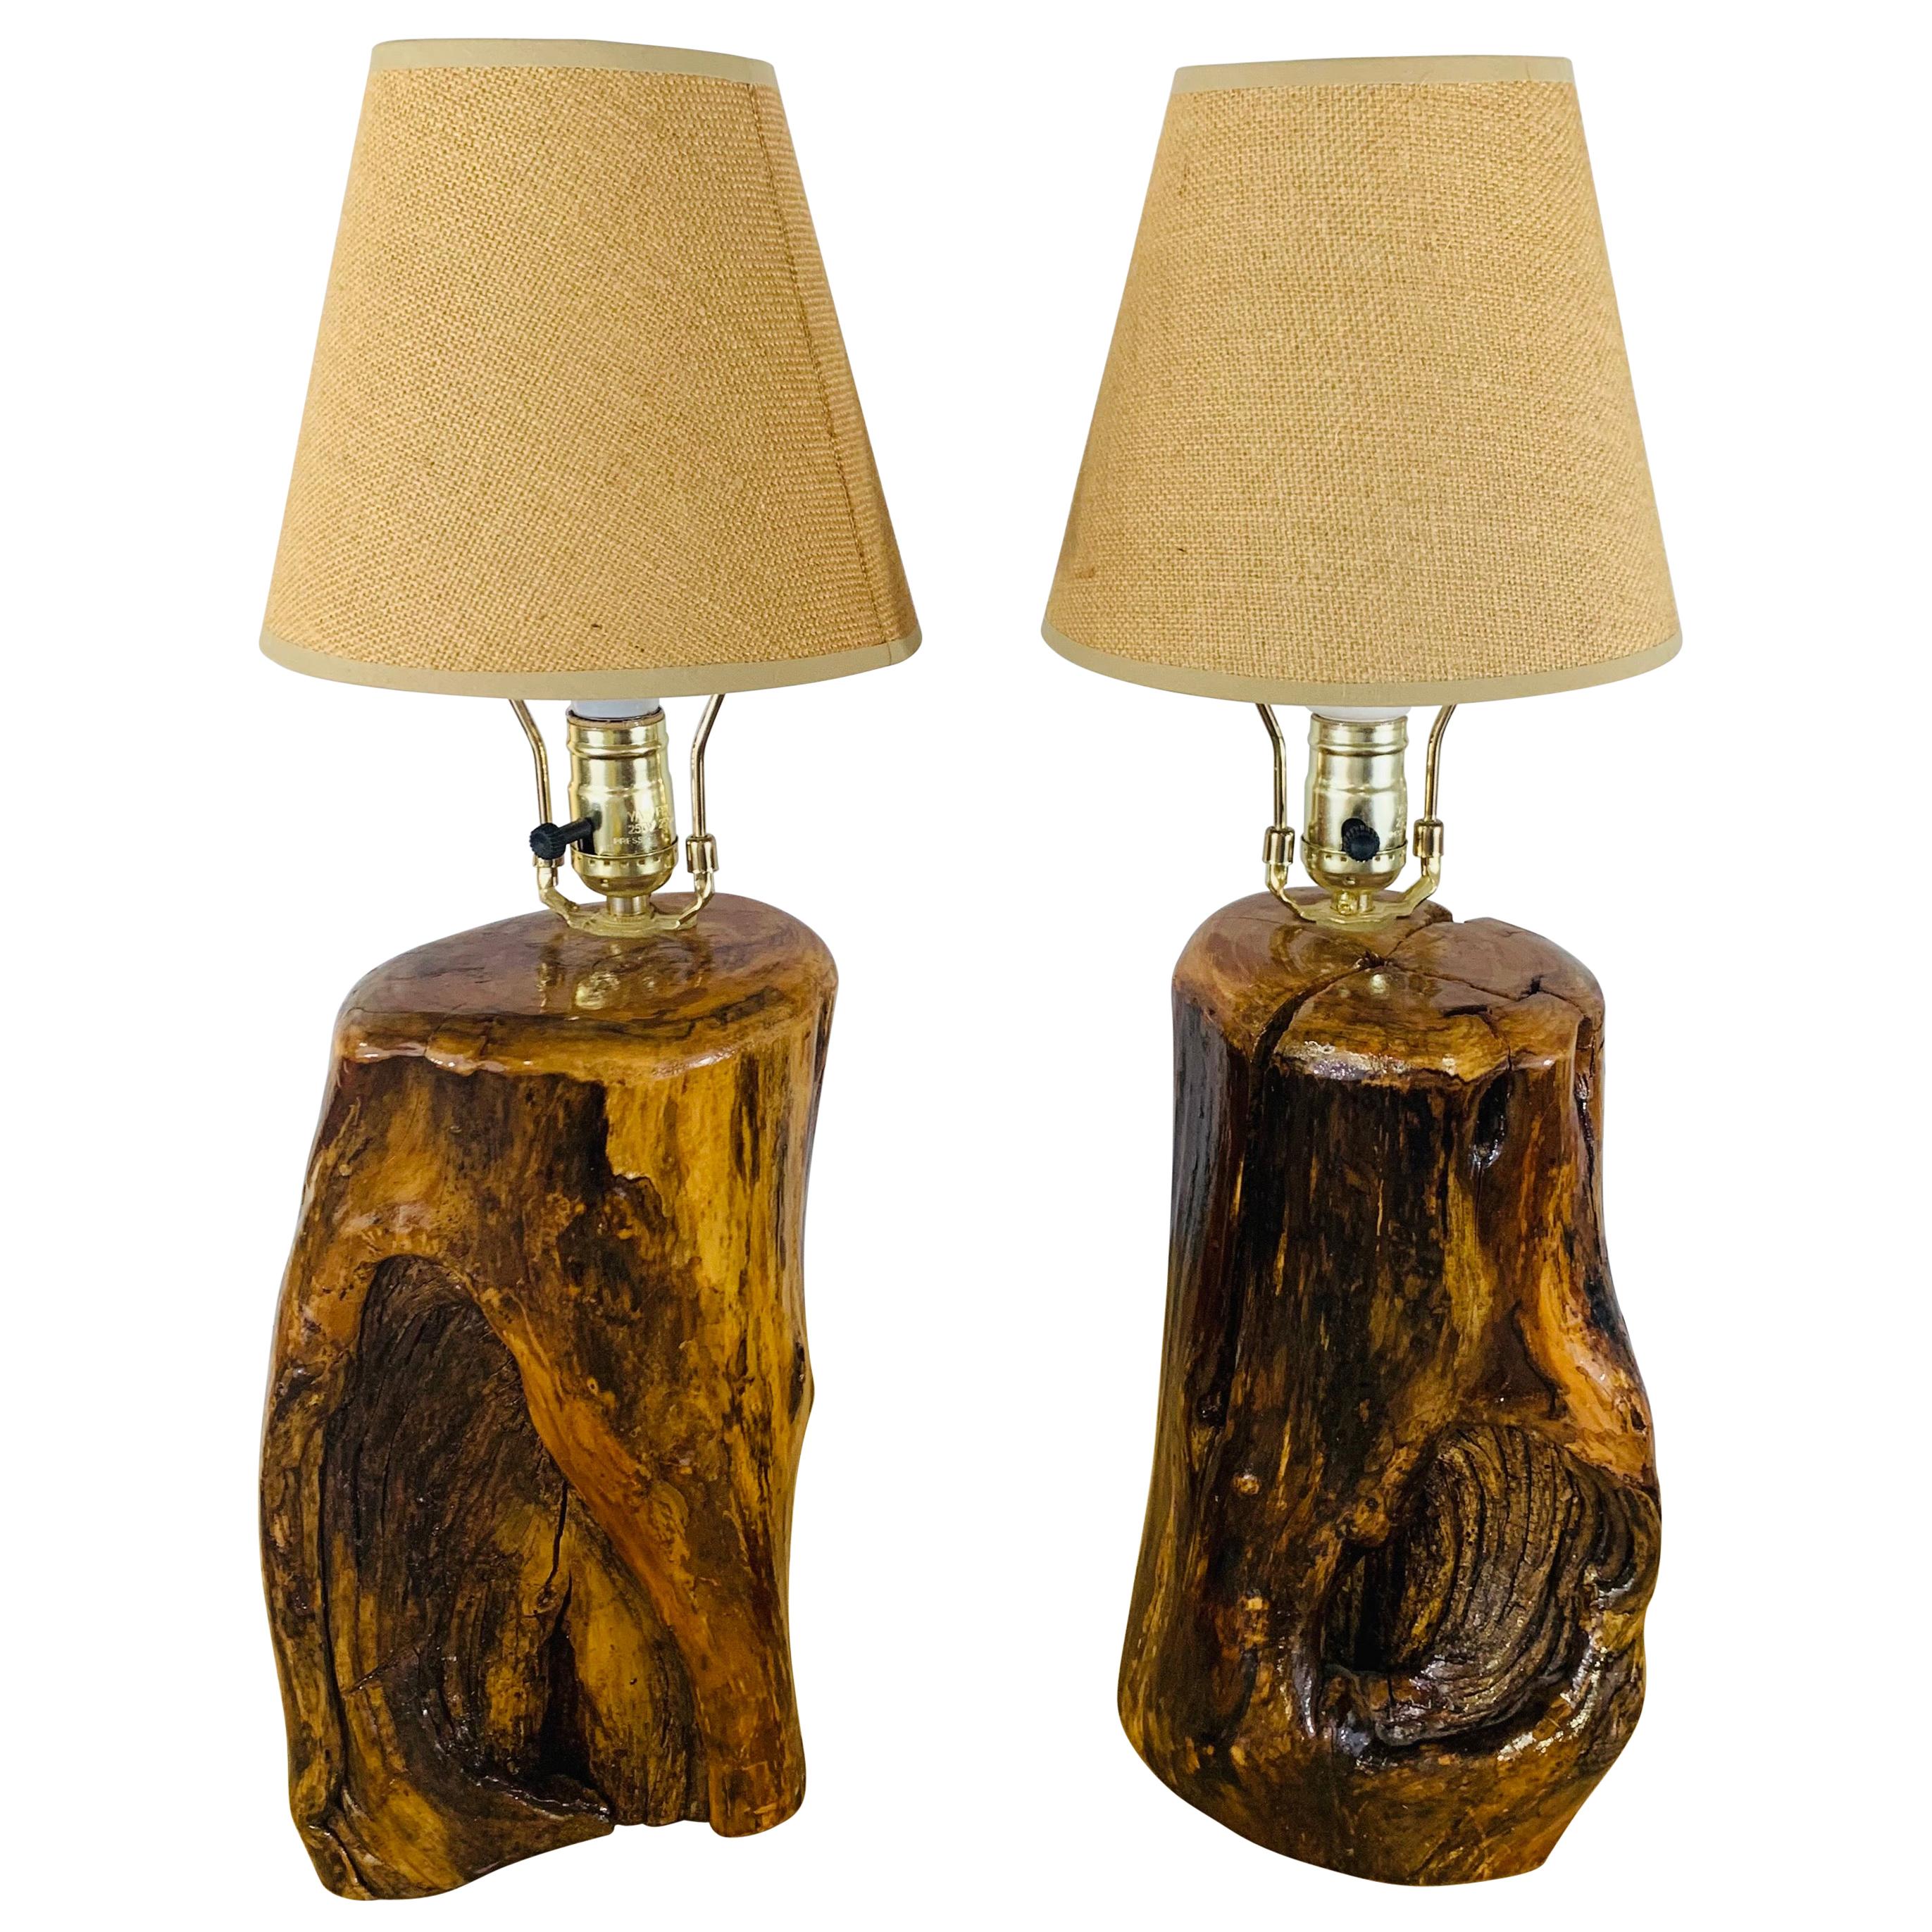 Organic Modern Design Maple Wood Table, Brass And Wood Table Lamps